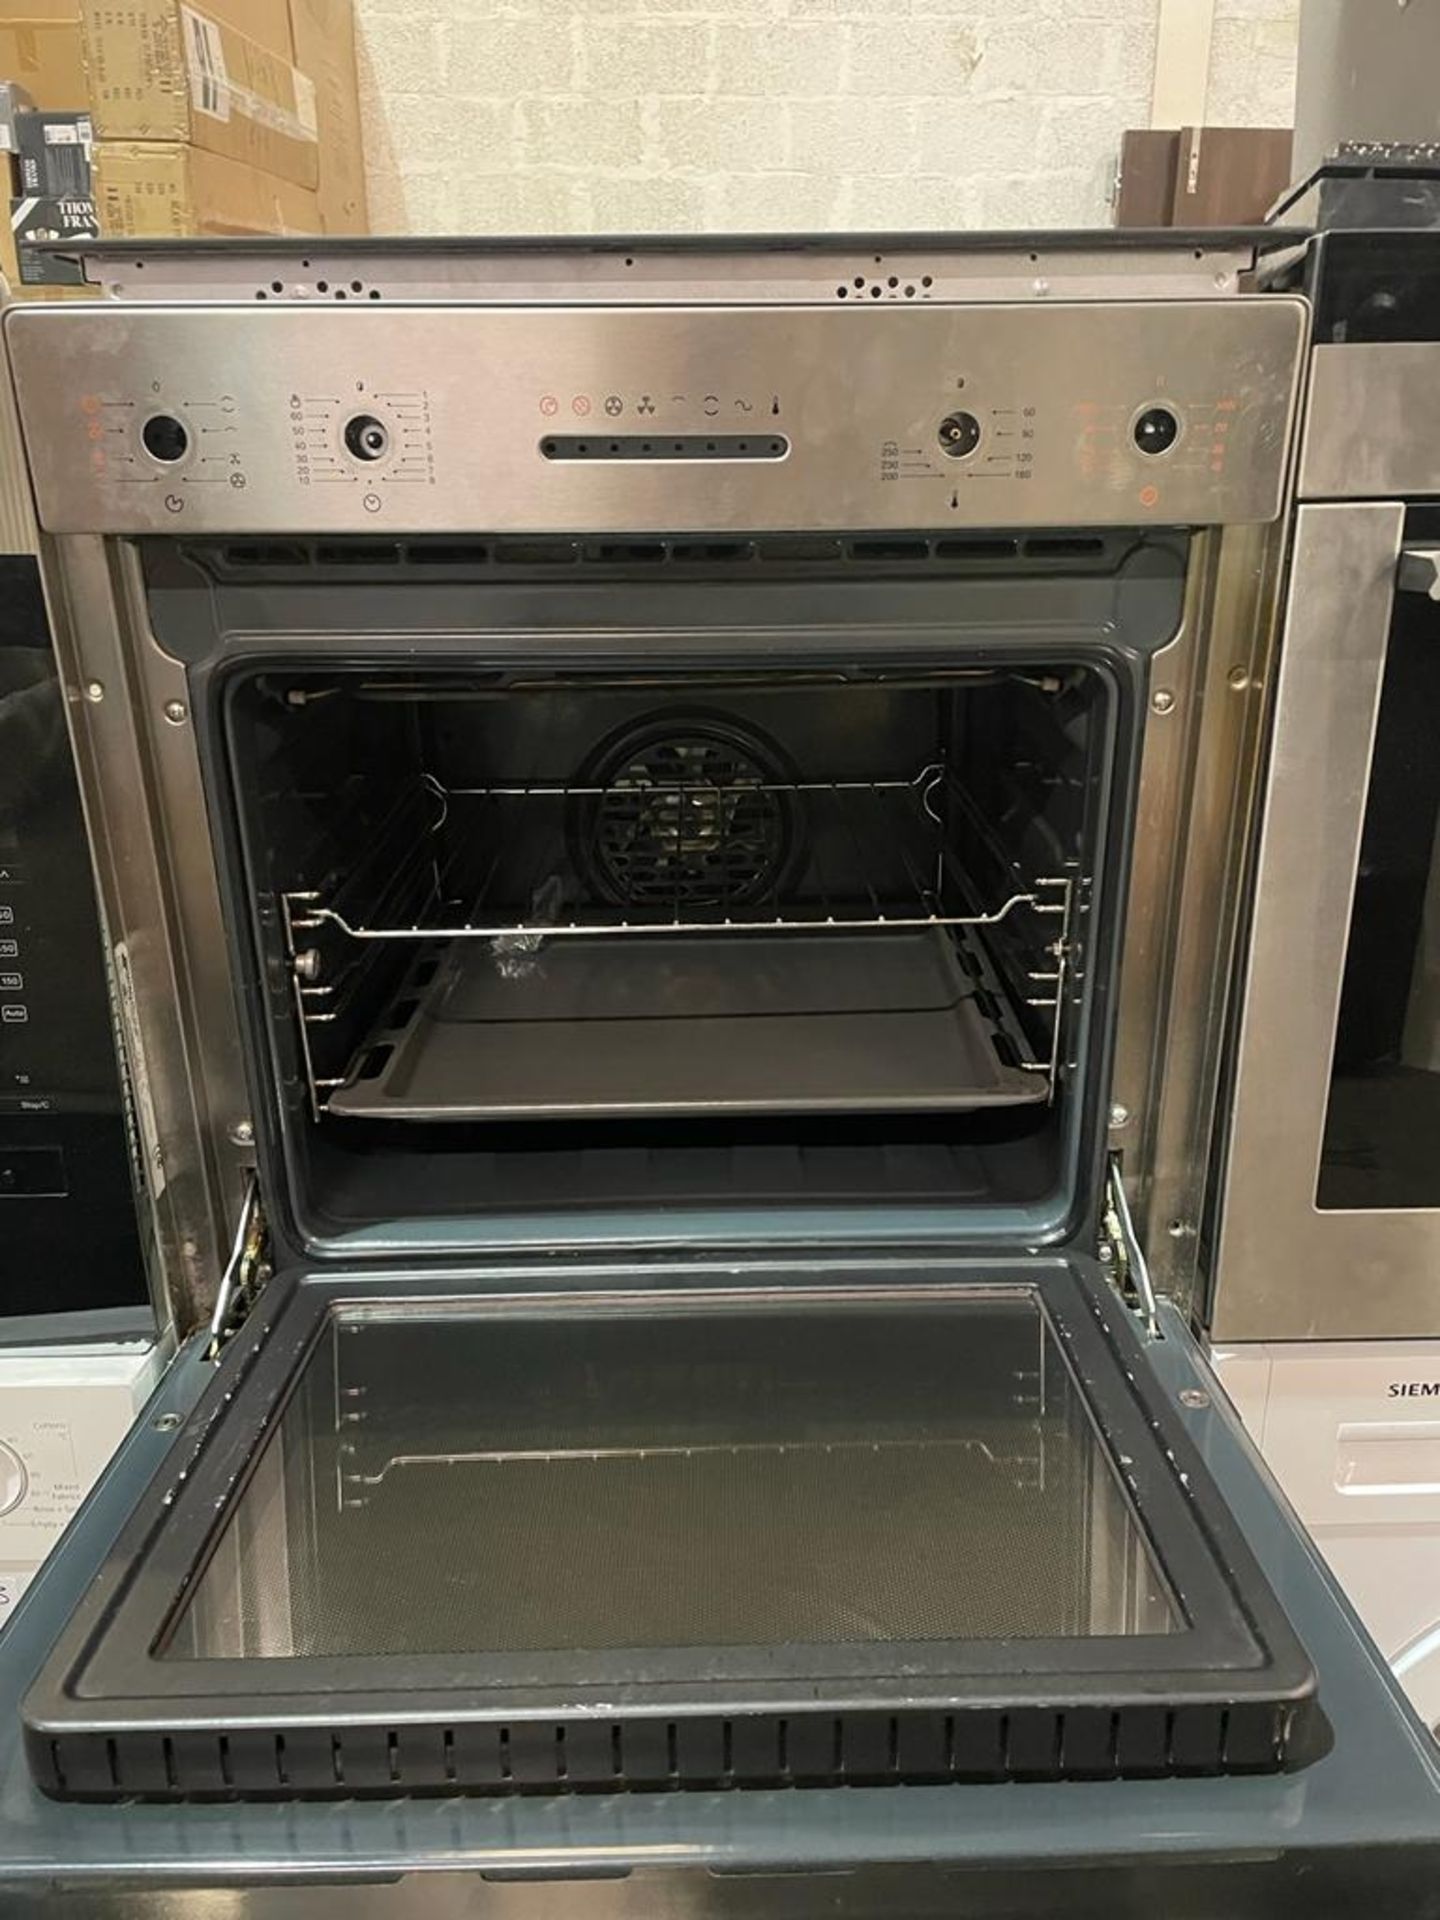 Smeg S201X Oven 50 L Stainless Steel Smeg S201X. Oven Type: Electric, Total Oven(S) Interior